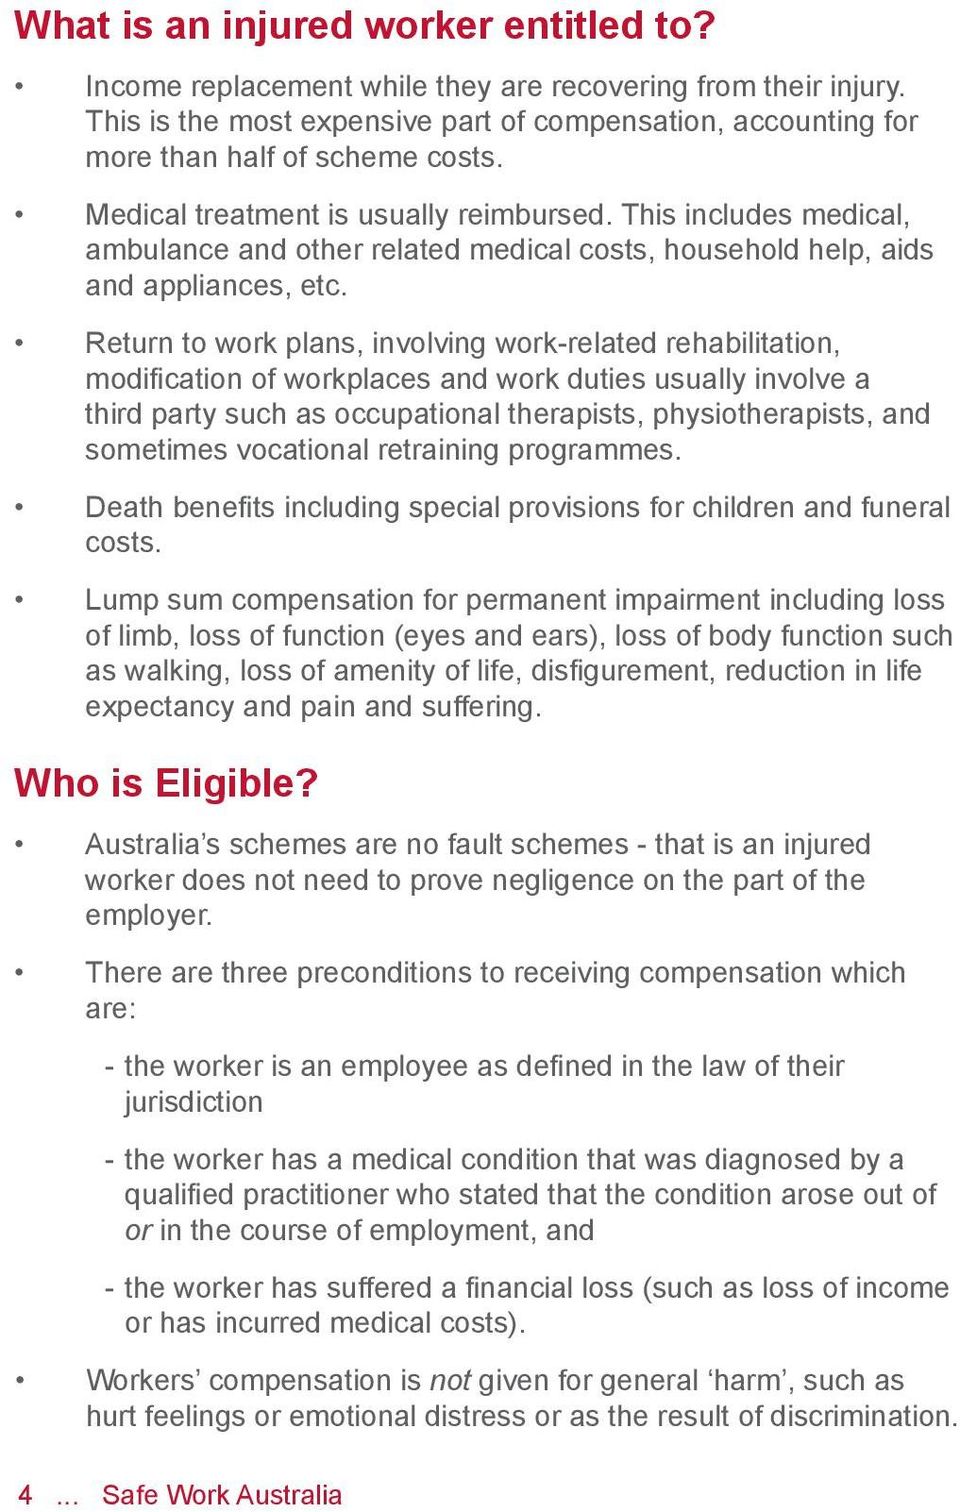 Return to work plans, involving work-related rehabilitation, modification of workplaces and work duties usually involve a third party such as occupational therapists, physiotherapists, and sometimes